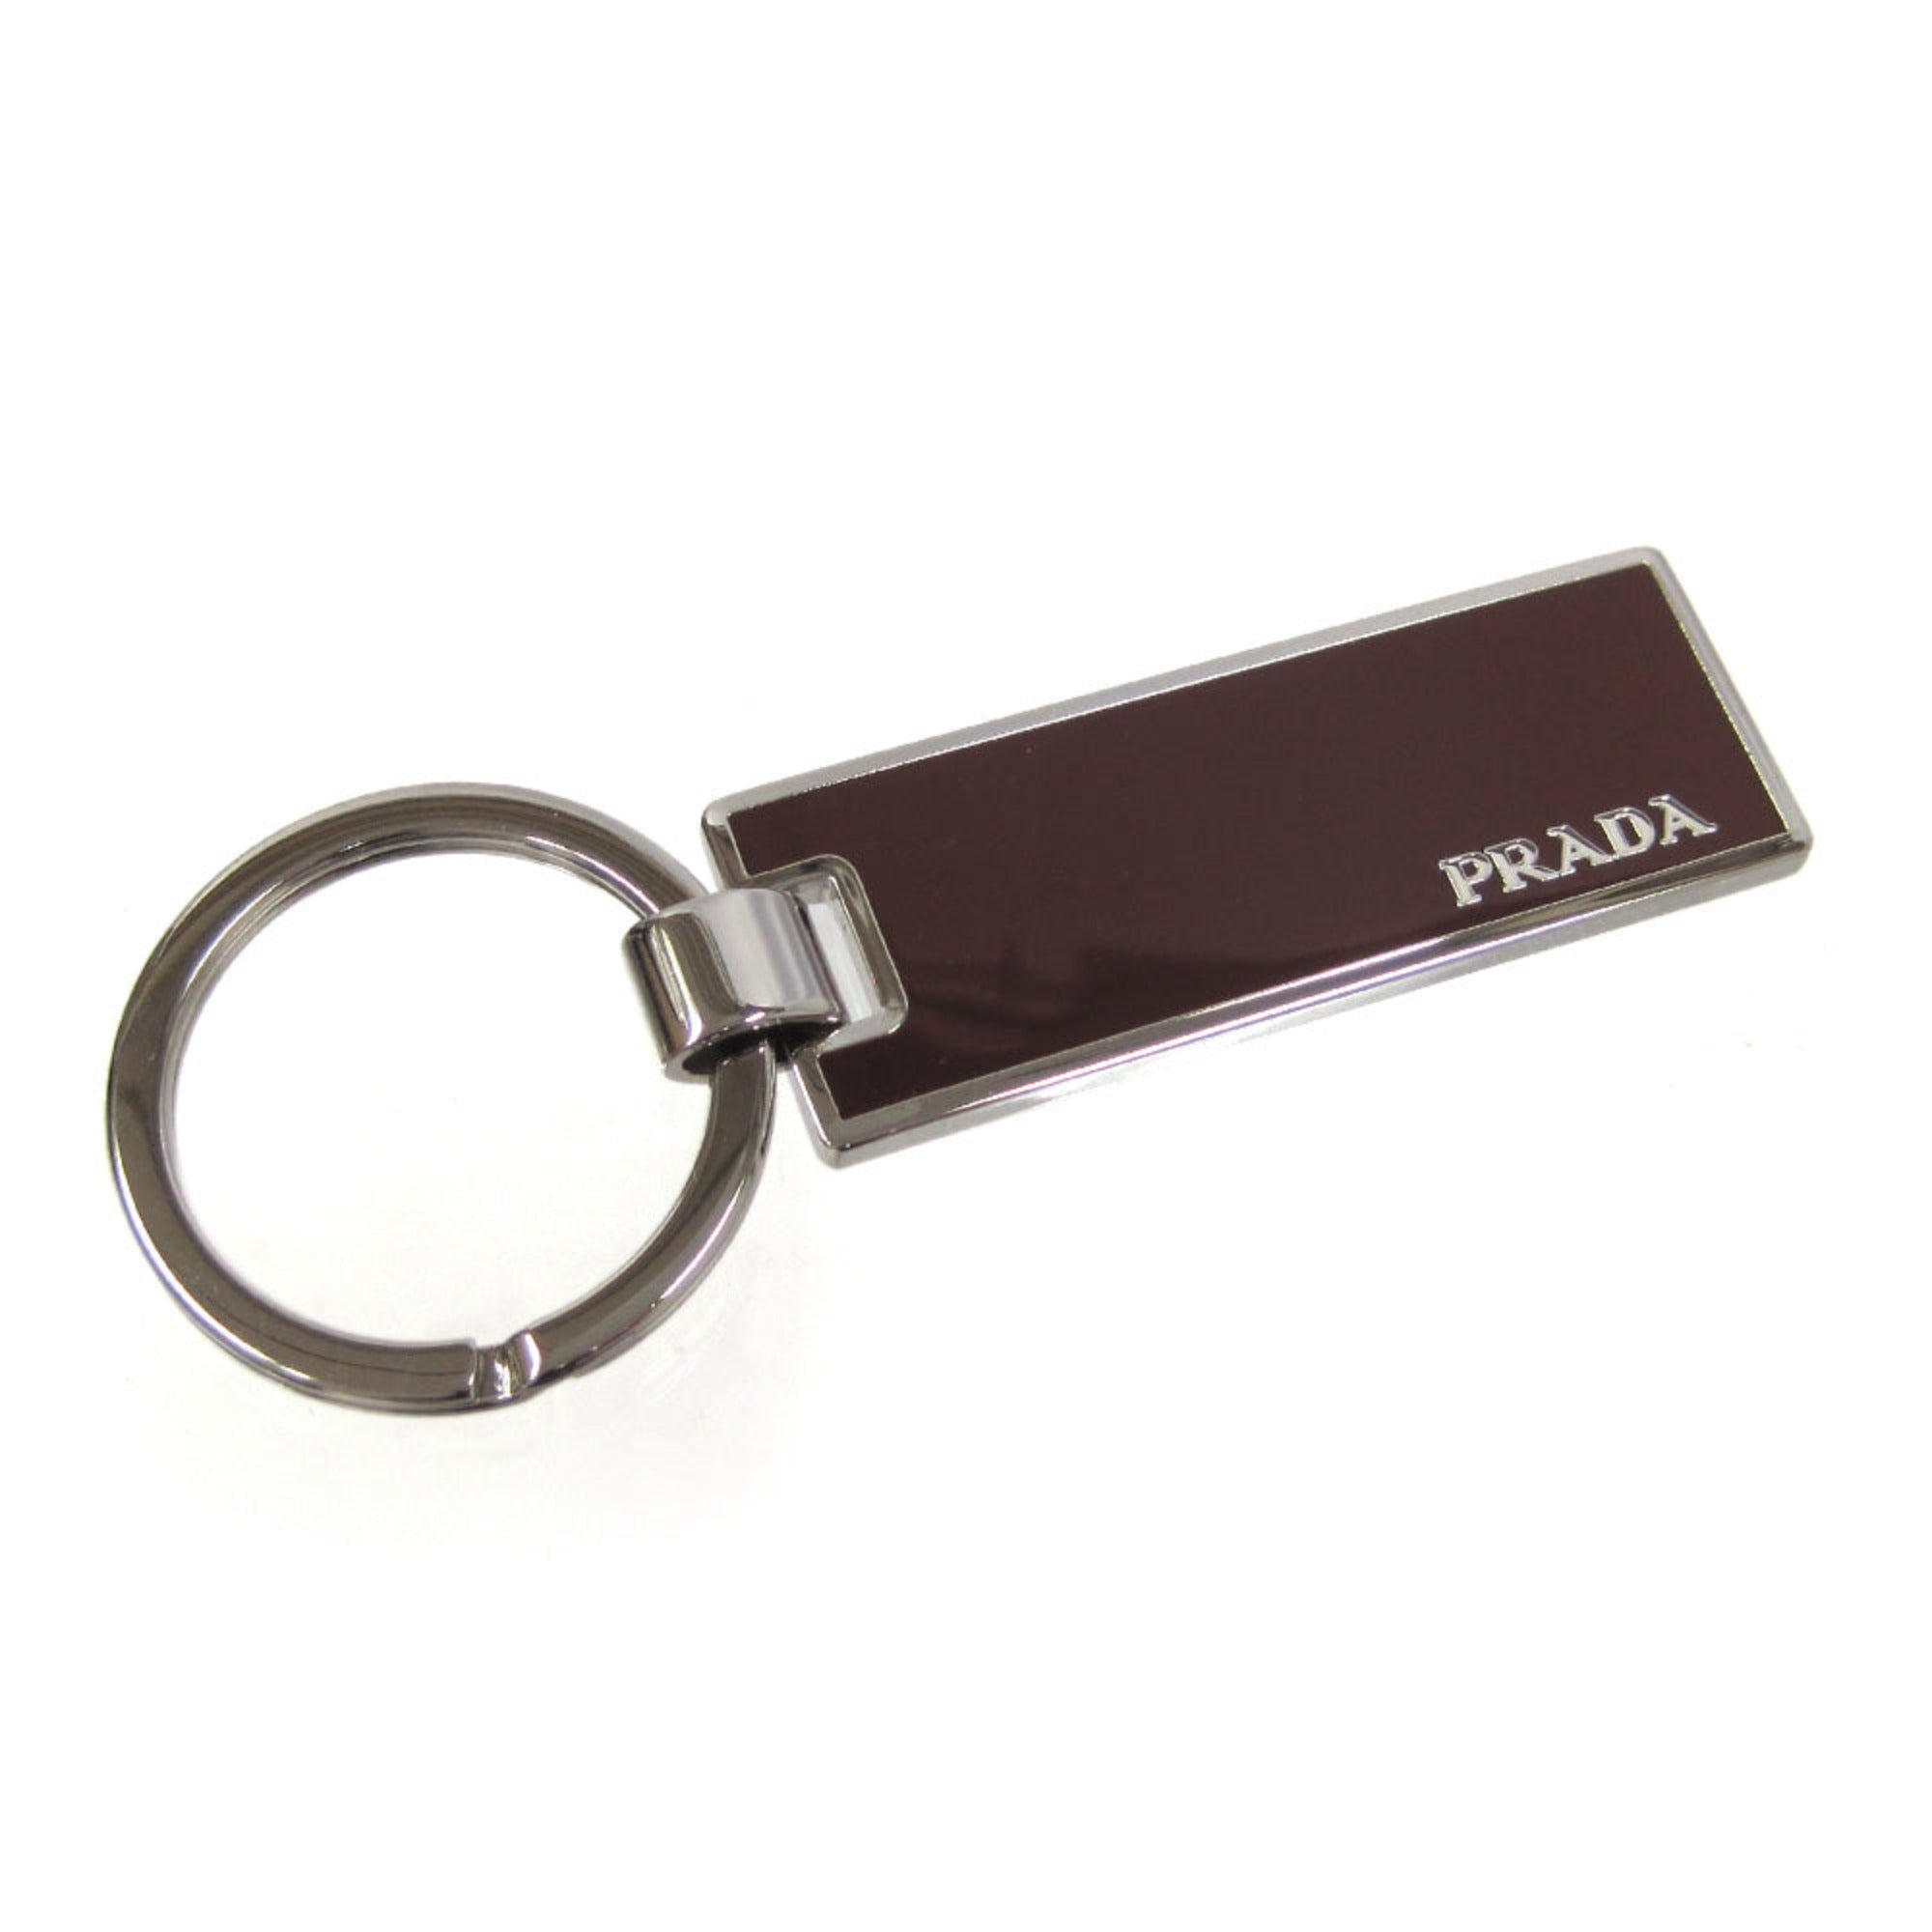 Prada Rubino Red Silver Metal Keyring Keychain 2PS021 at_Queen_Bee_of_Beverly_Hills